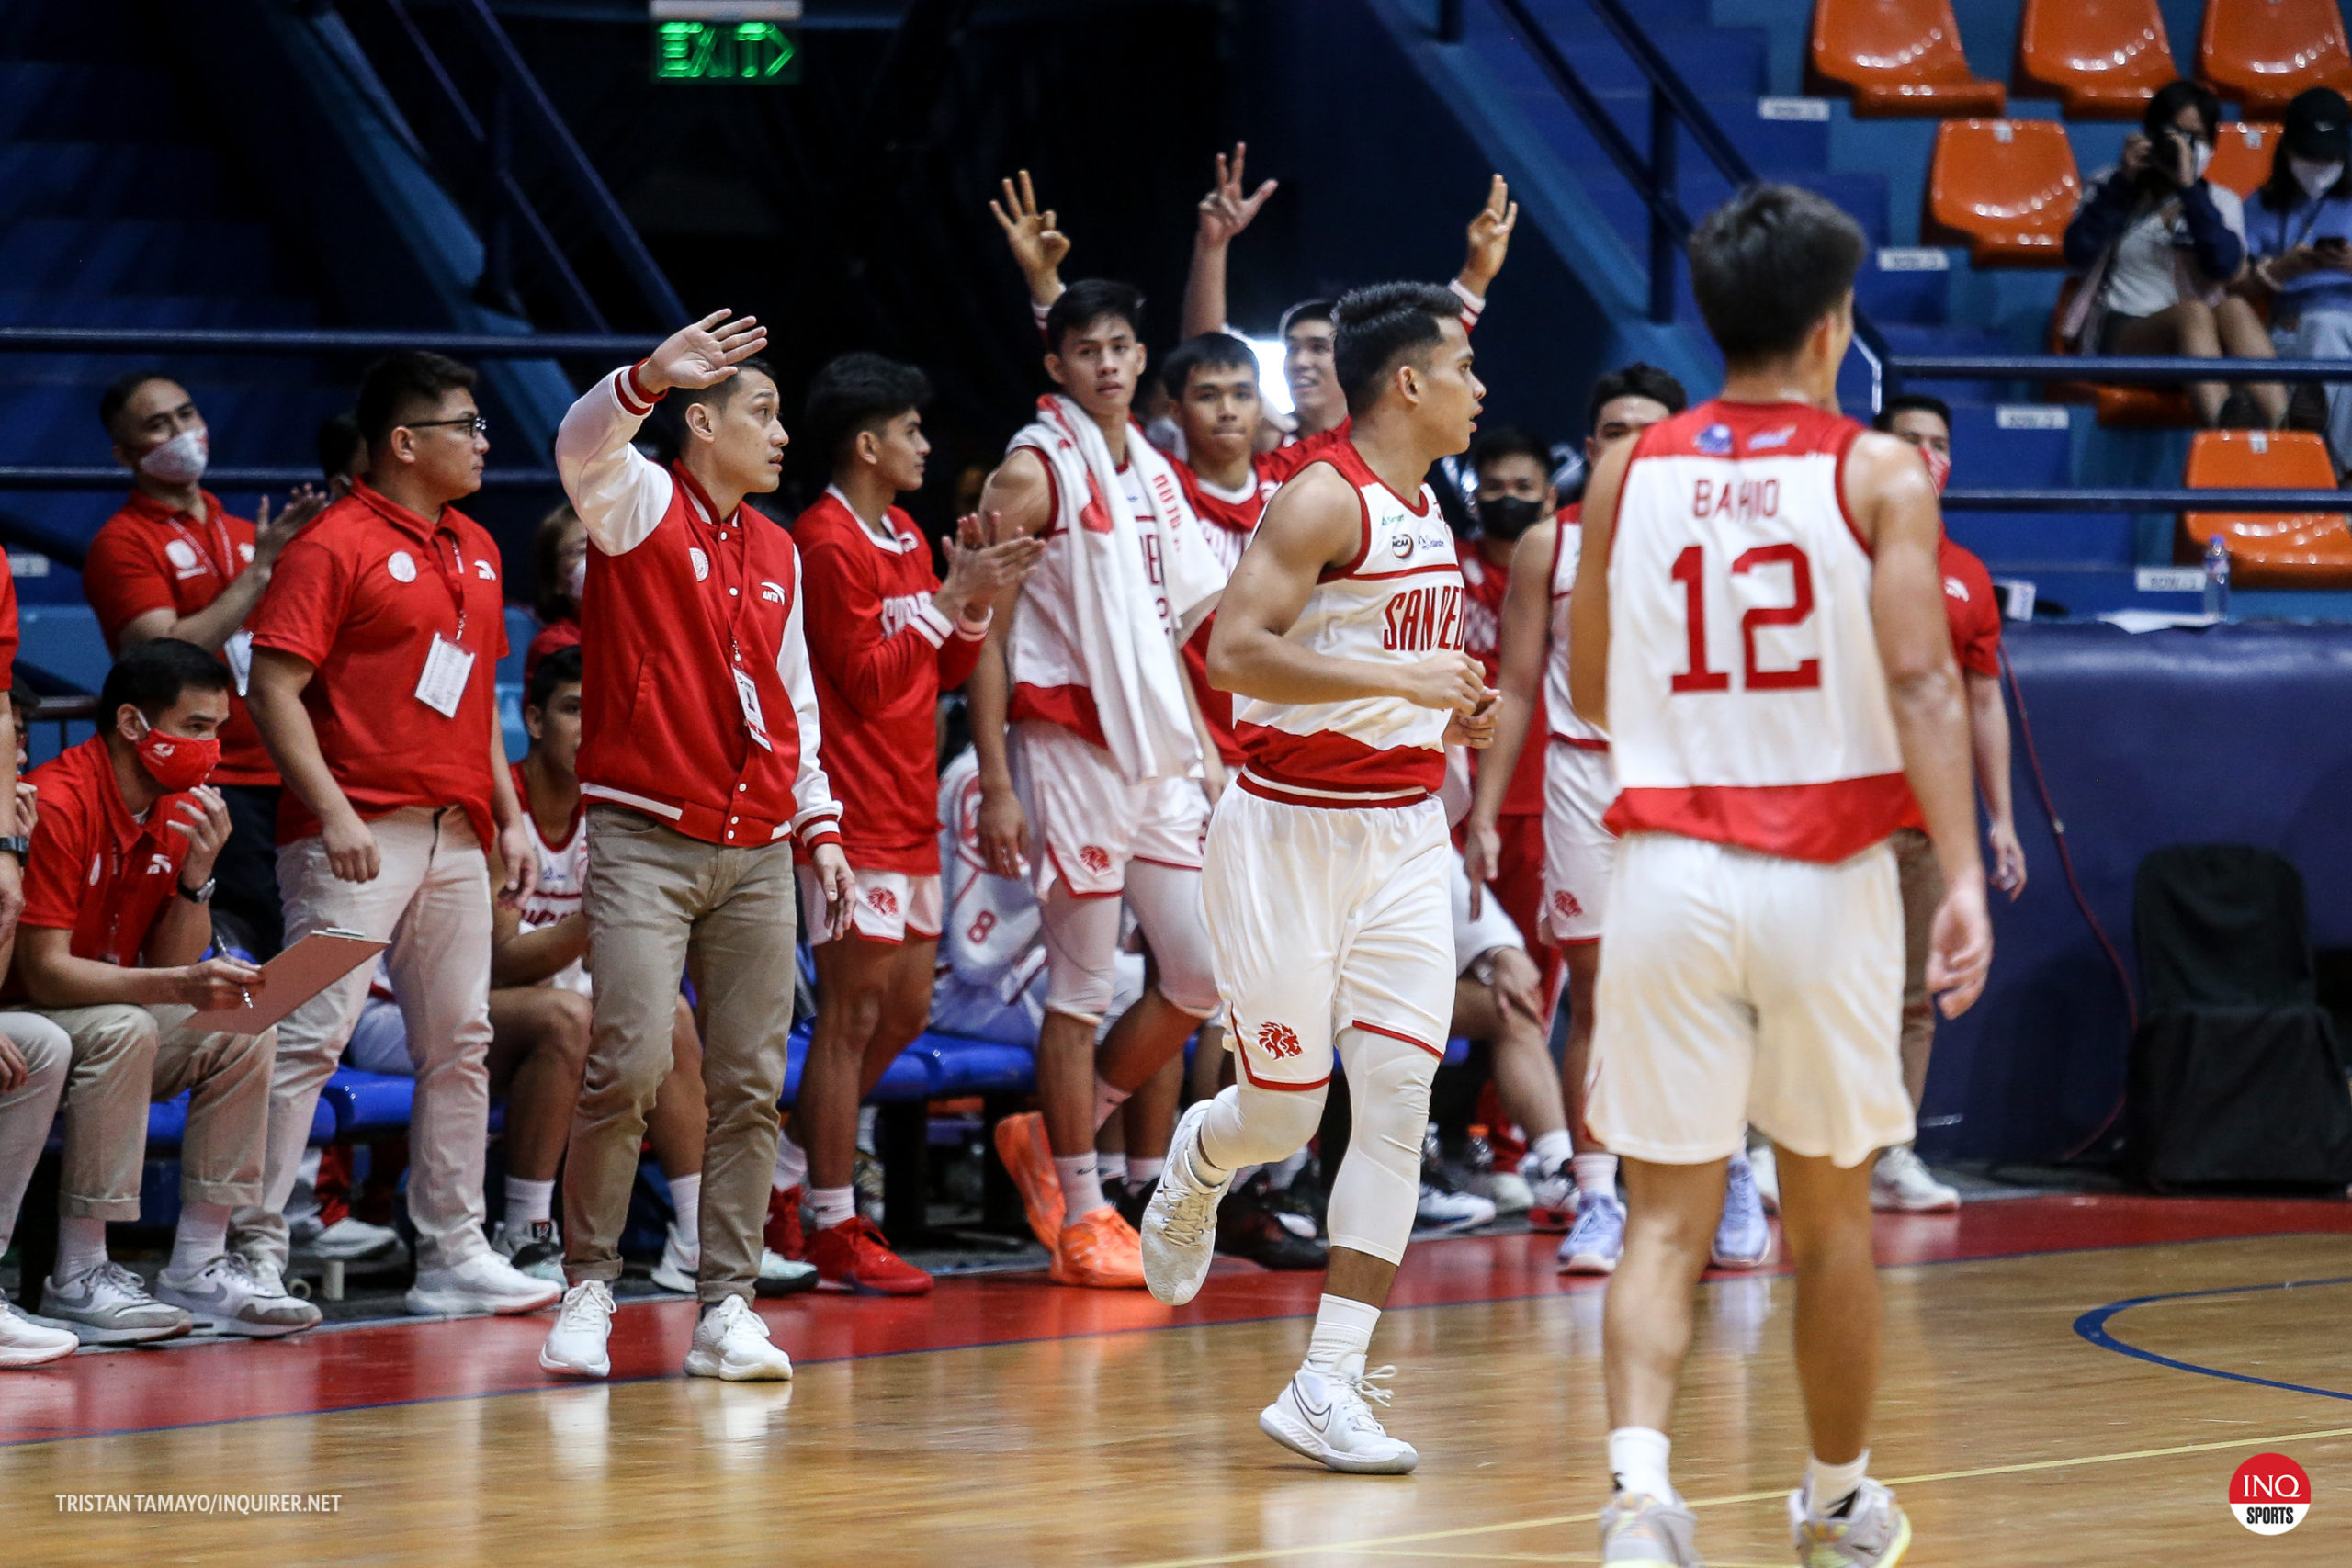 RED SAN BEDA LIONS. 